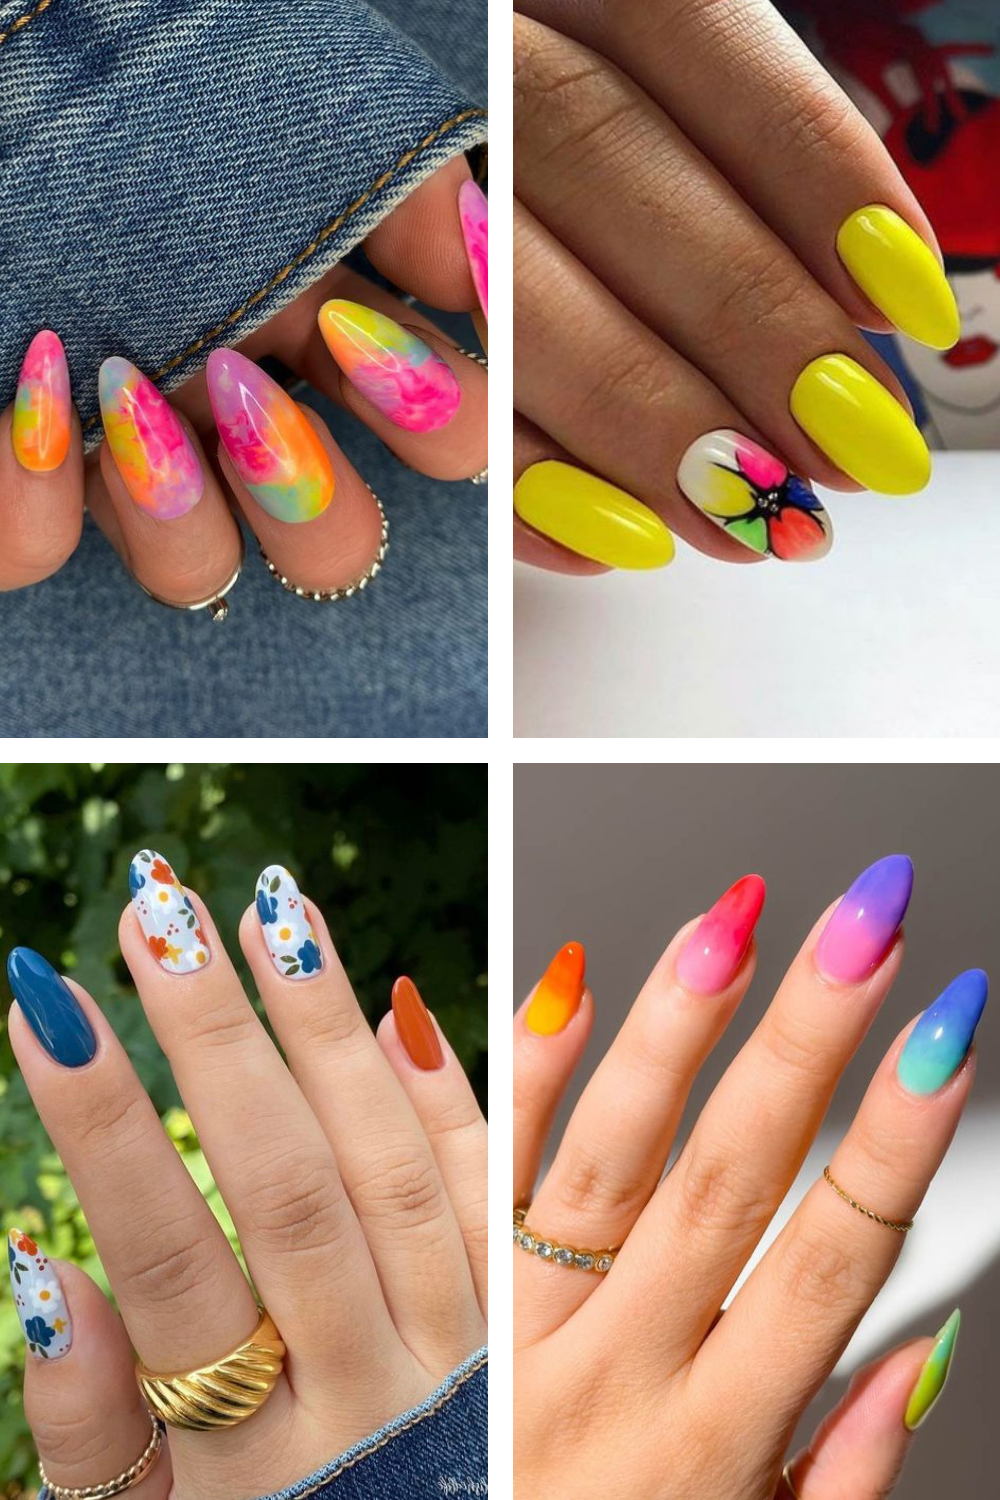 44 Stunning June Nails To Fall in Love With this Season!